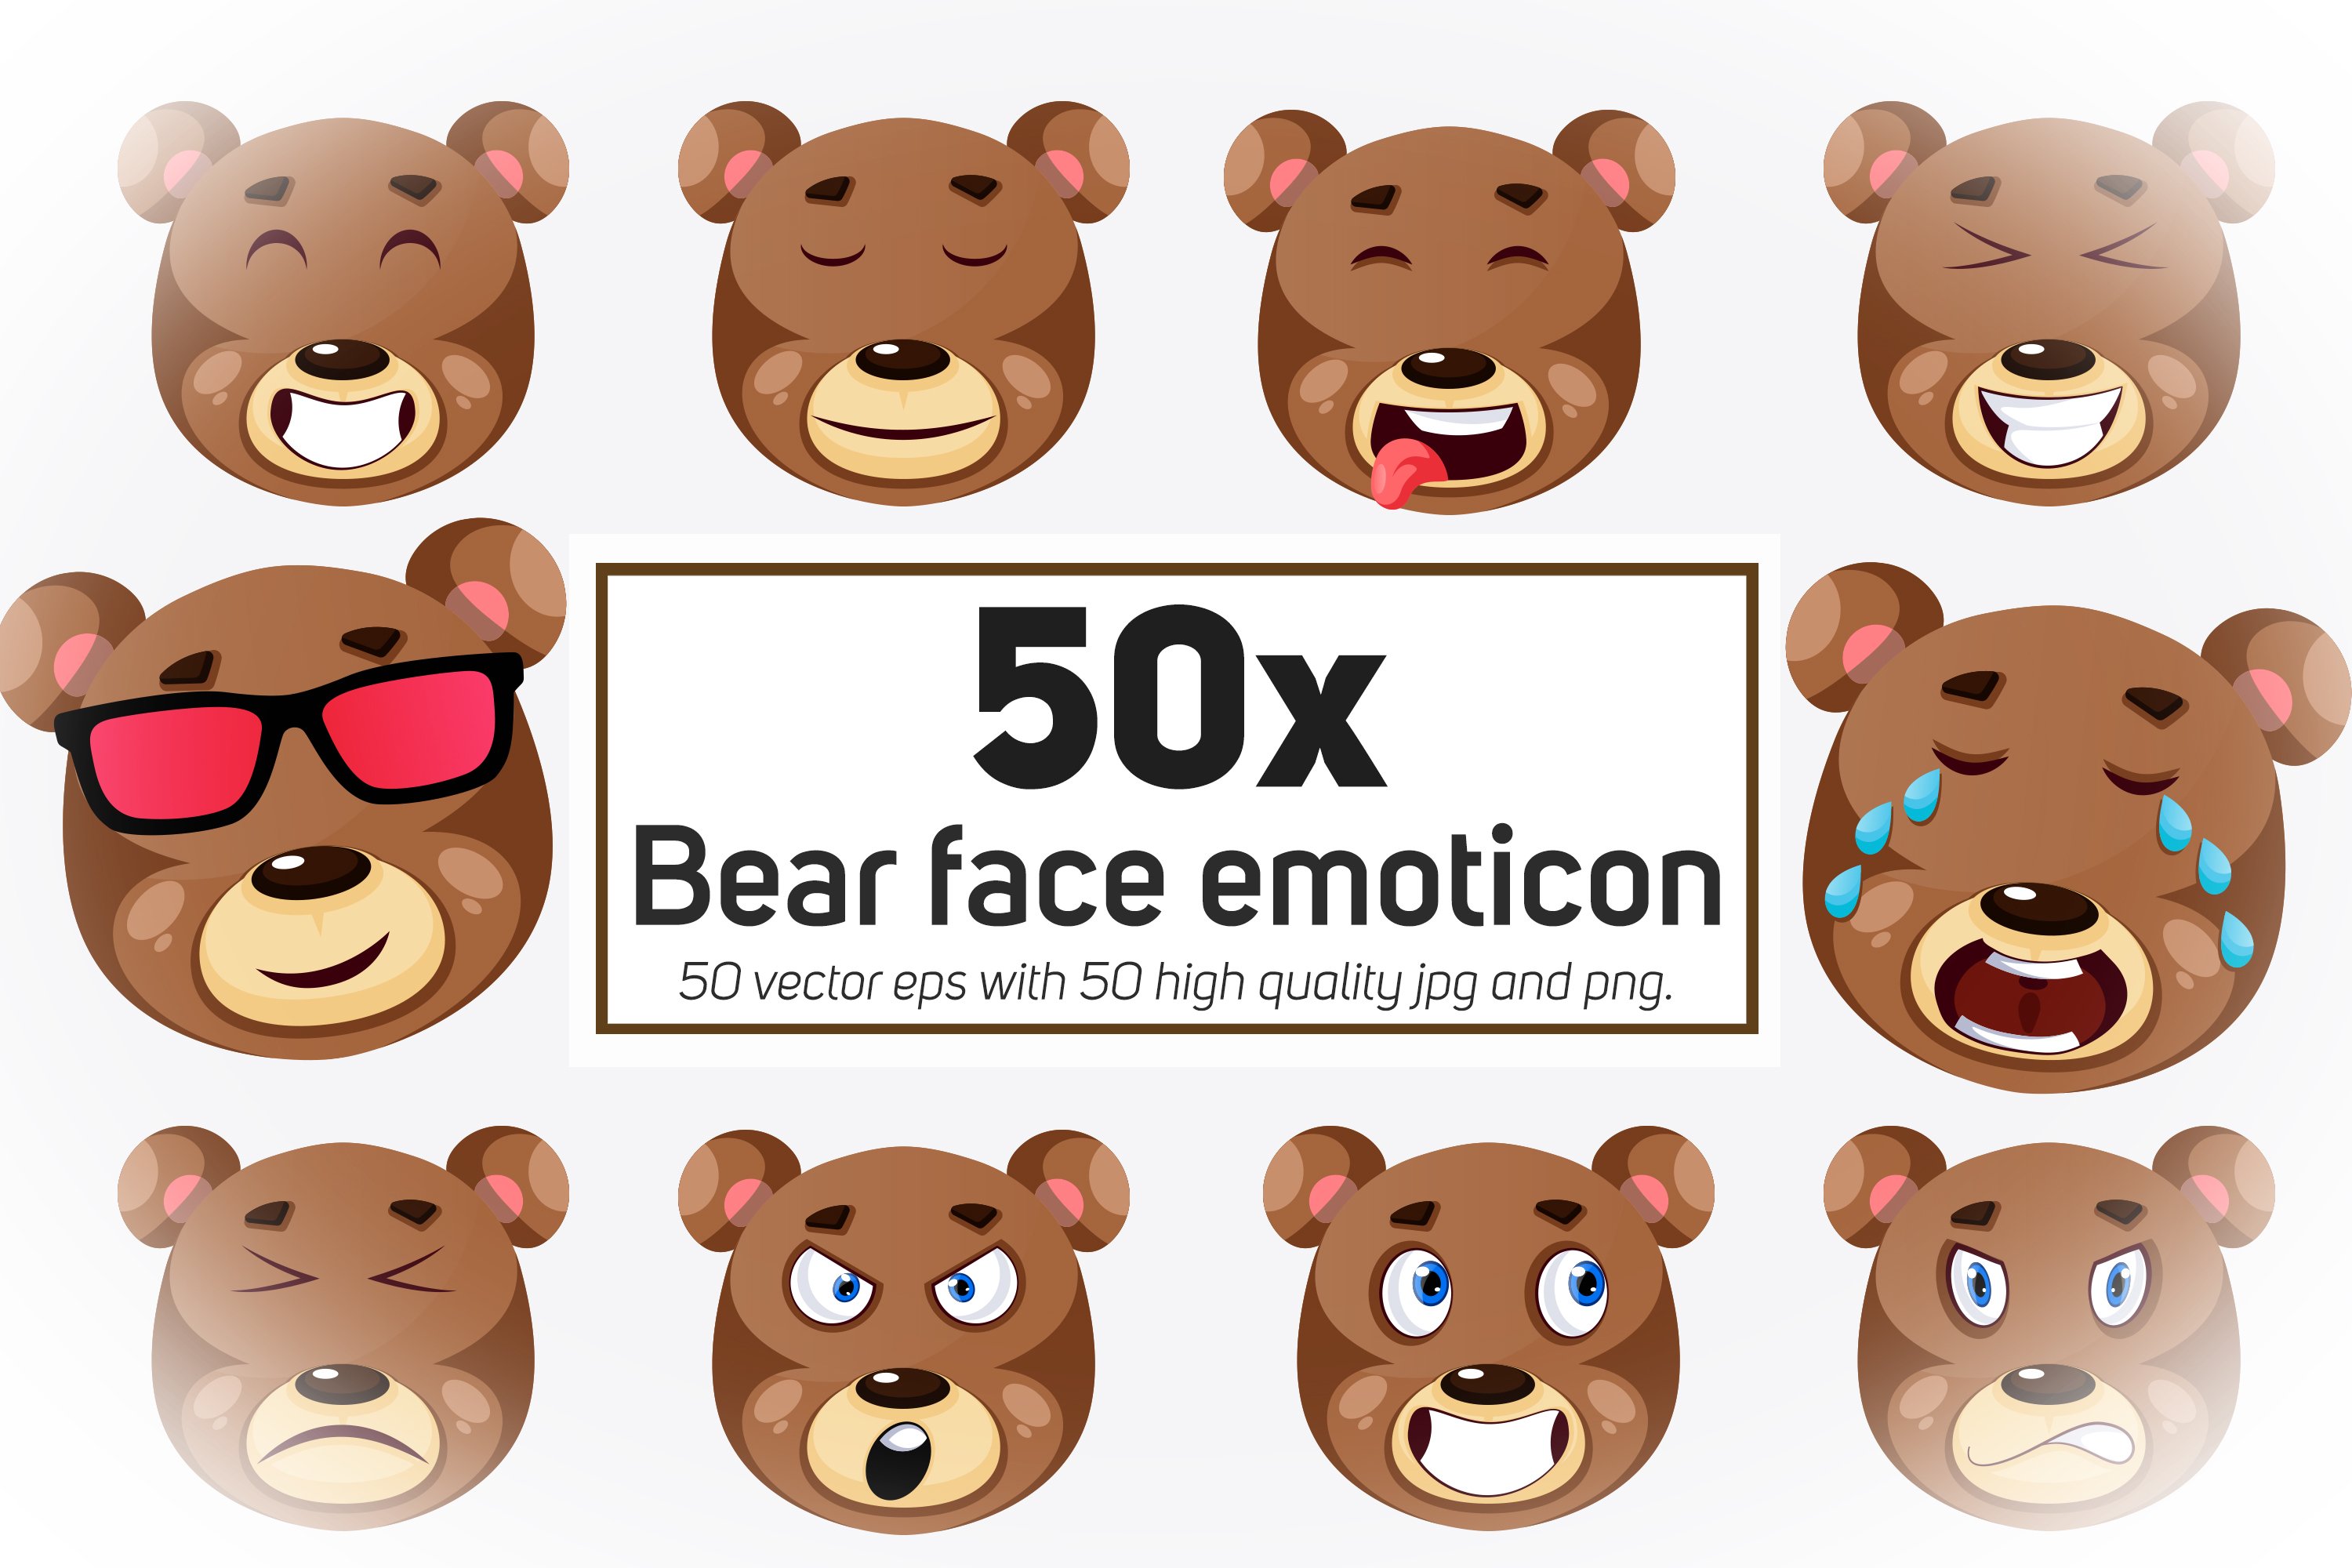 A pack of adorable bear face emoticon images.